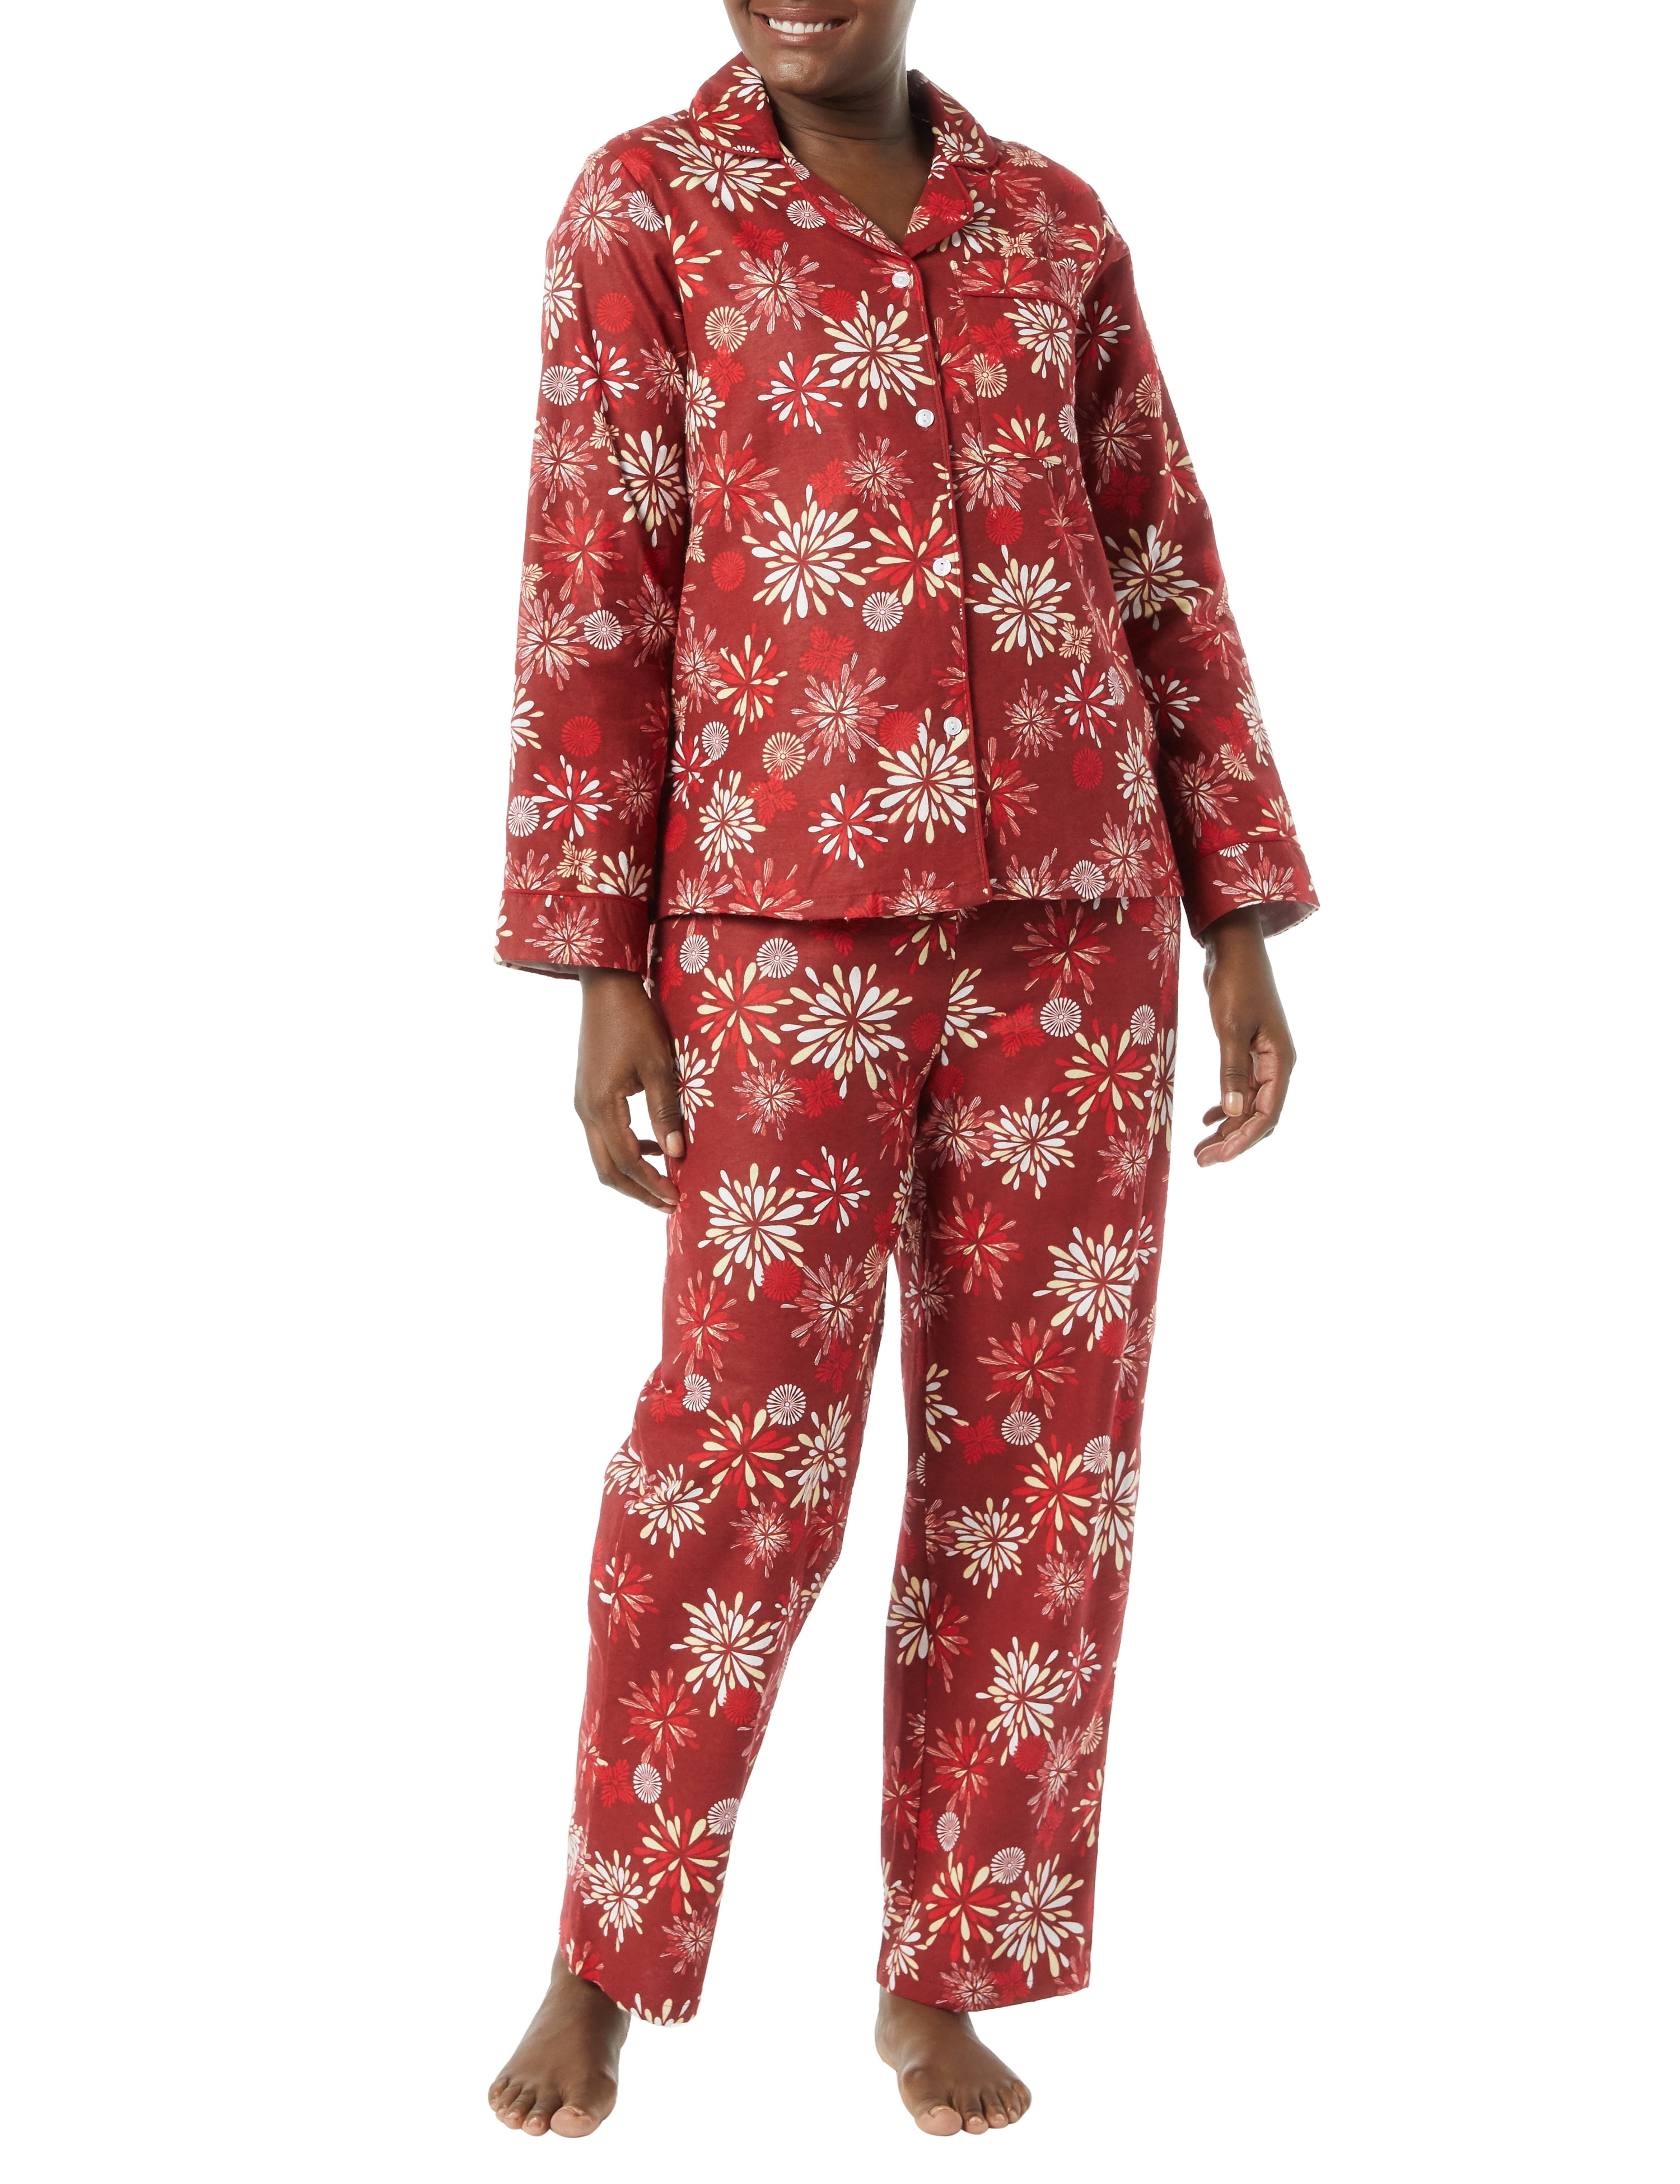 Red Magic Top & Shorts Pyjamas Monkeys Design S L M Expand in Water 